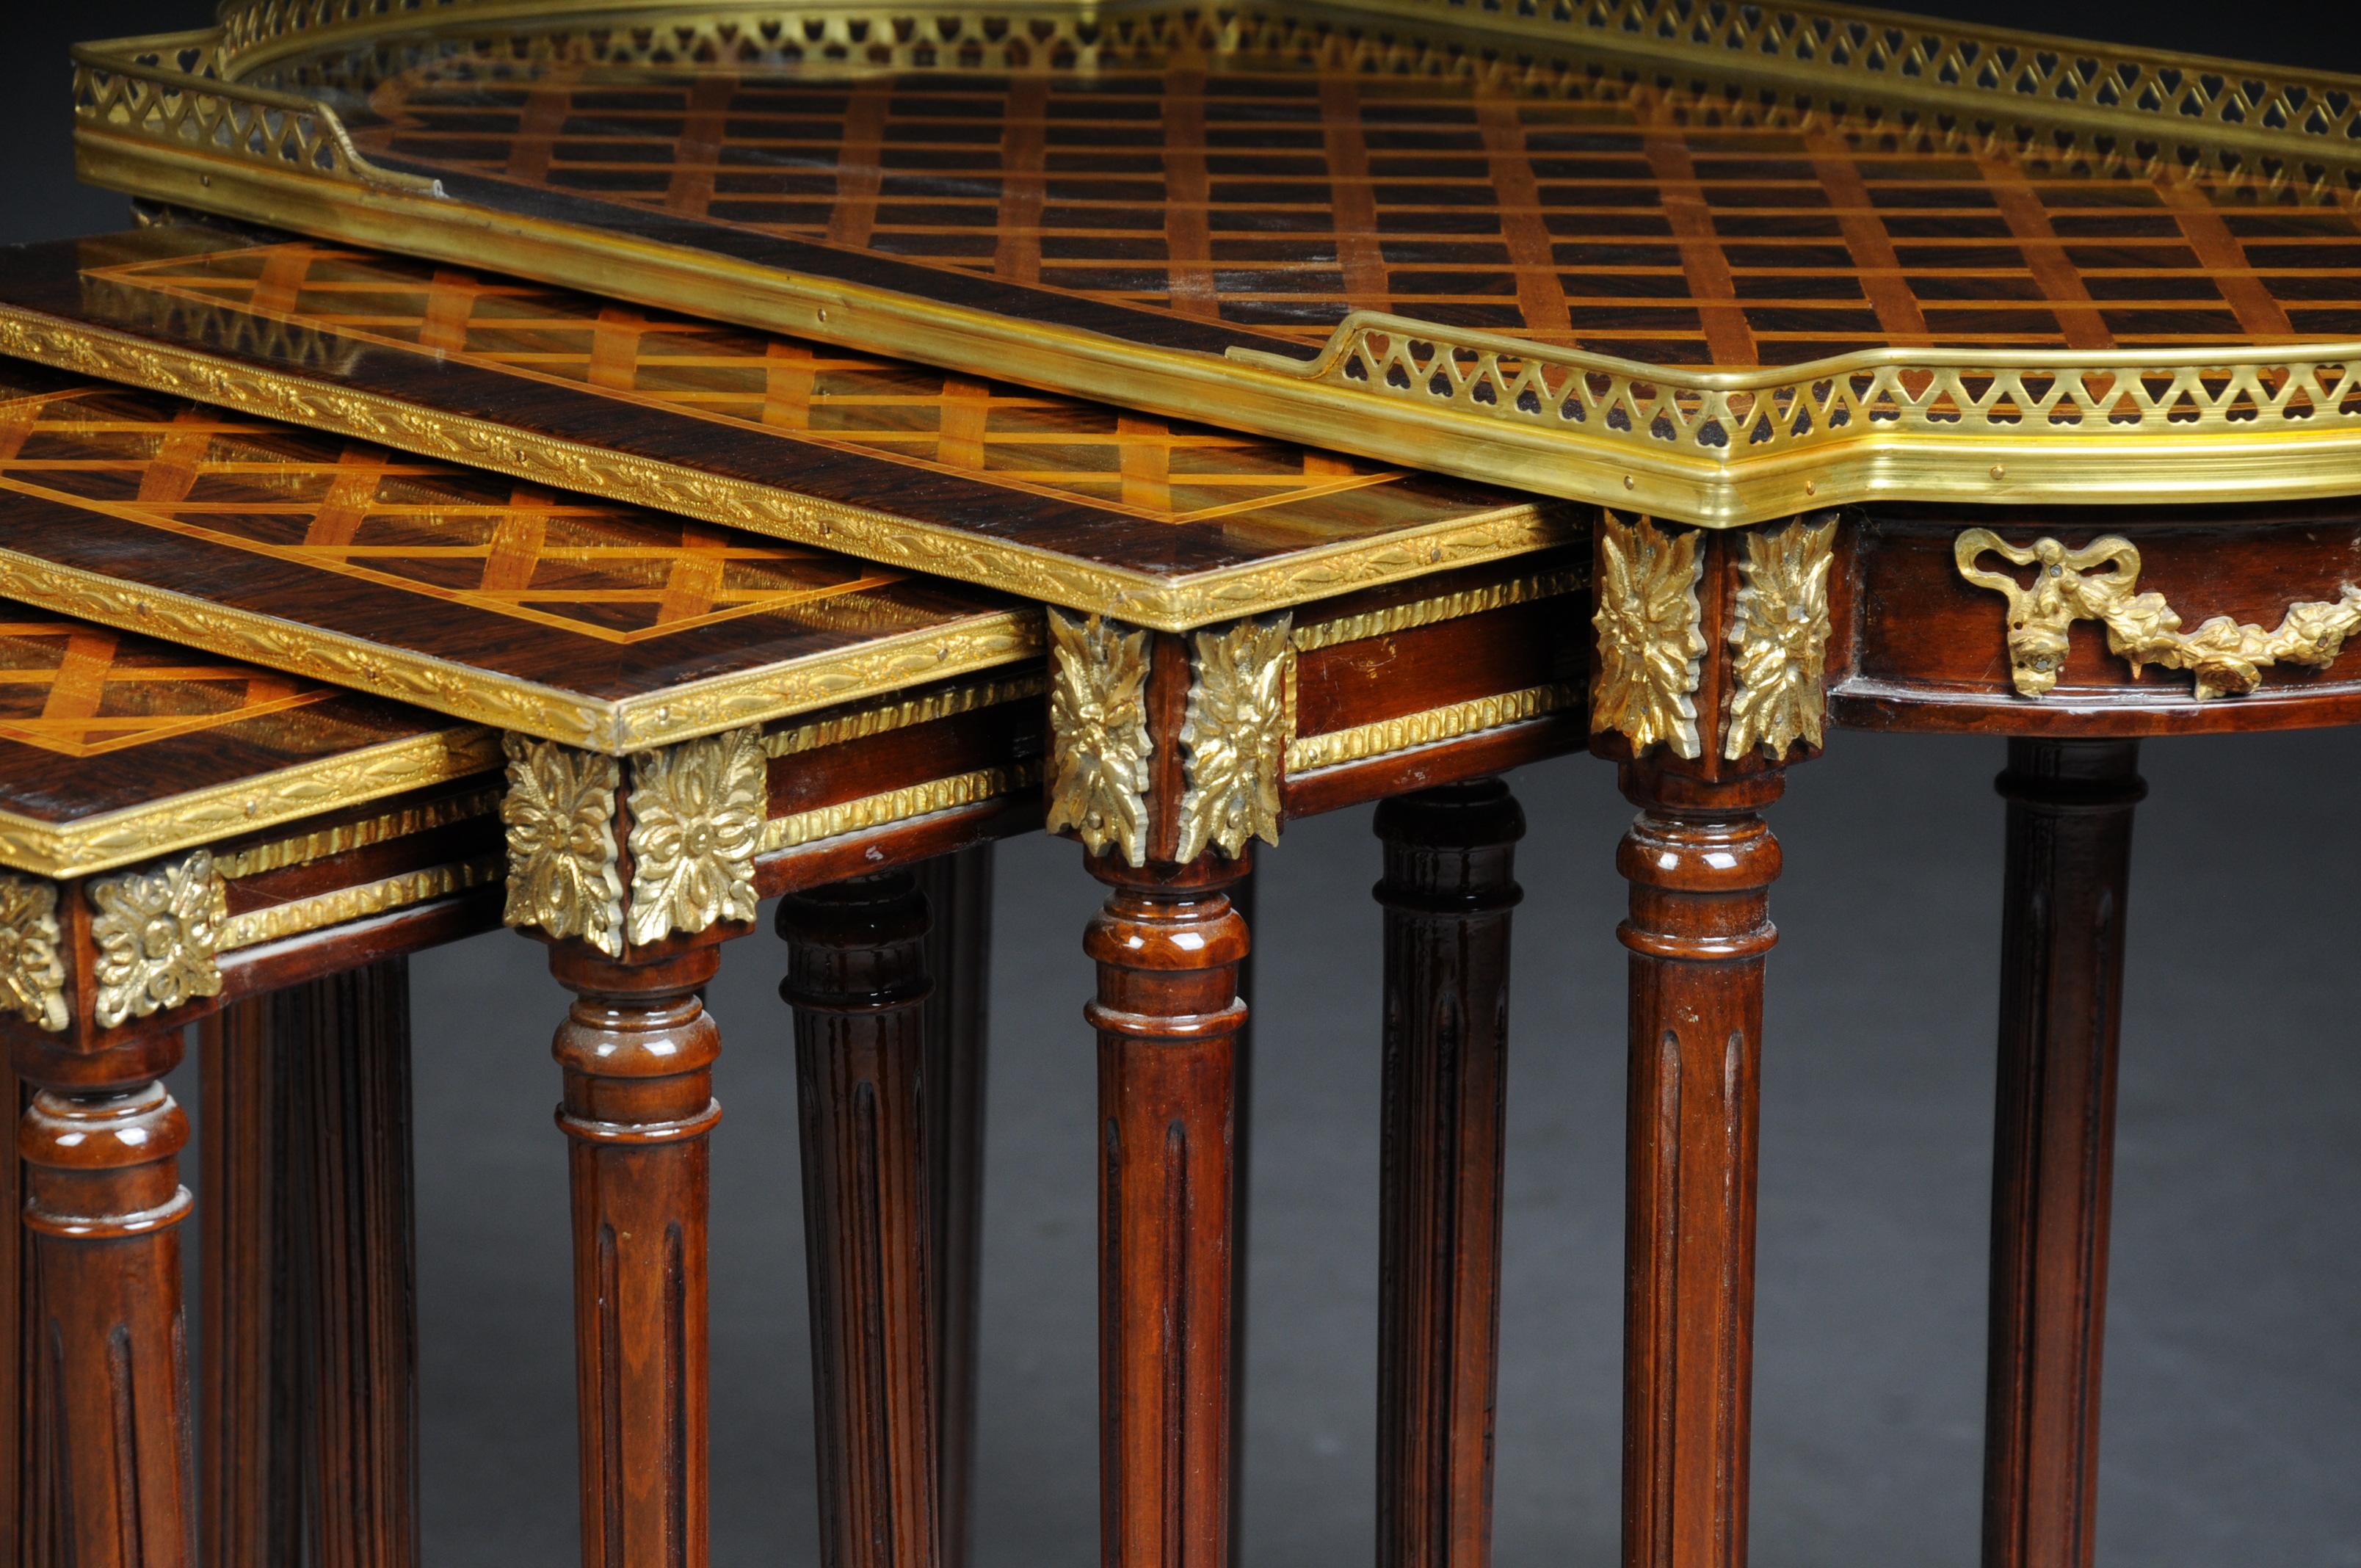 French Set of 4 Side Tables Louis Seize XVI m. Marquetry Veneer